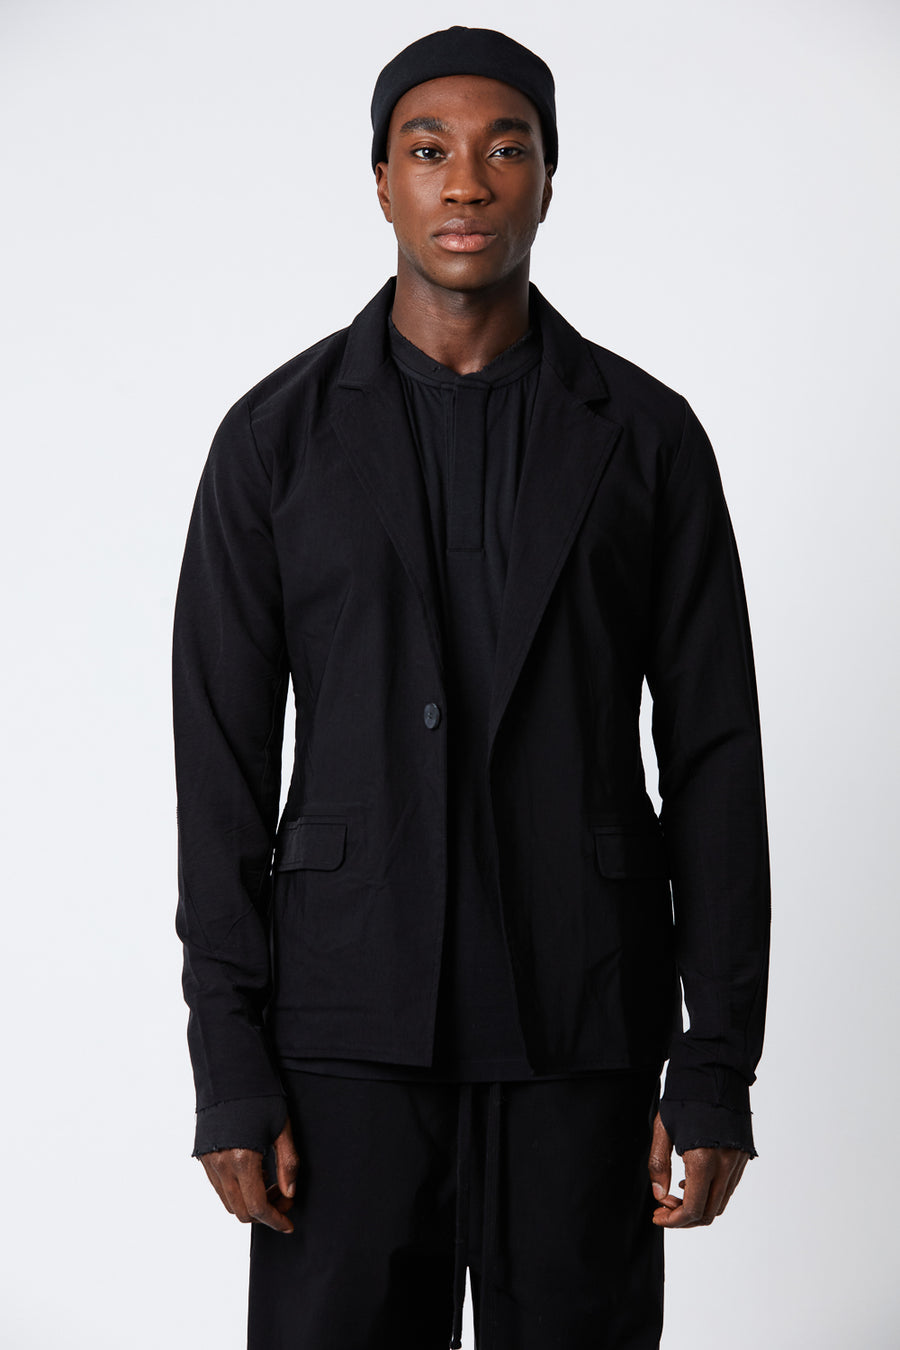 Buy the Thom Krom M SJ 566 Blazer Black at Intro. Spend £50 for free UK delivery. Official stockists. We ship worldwide.